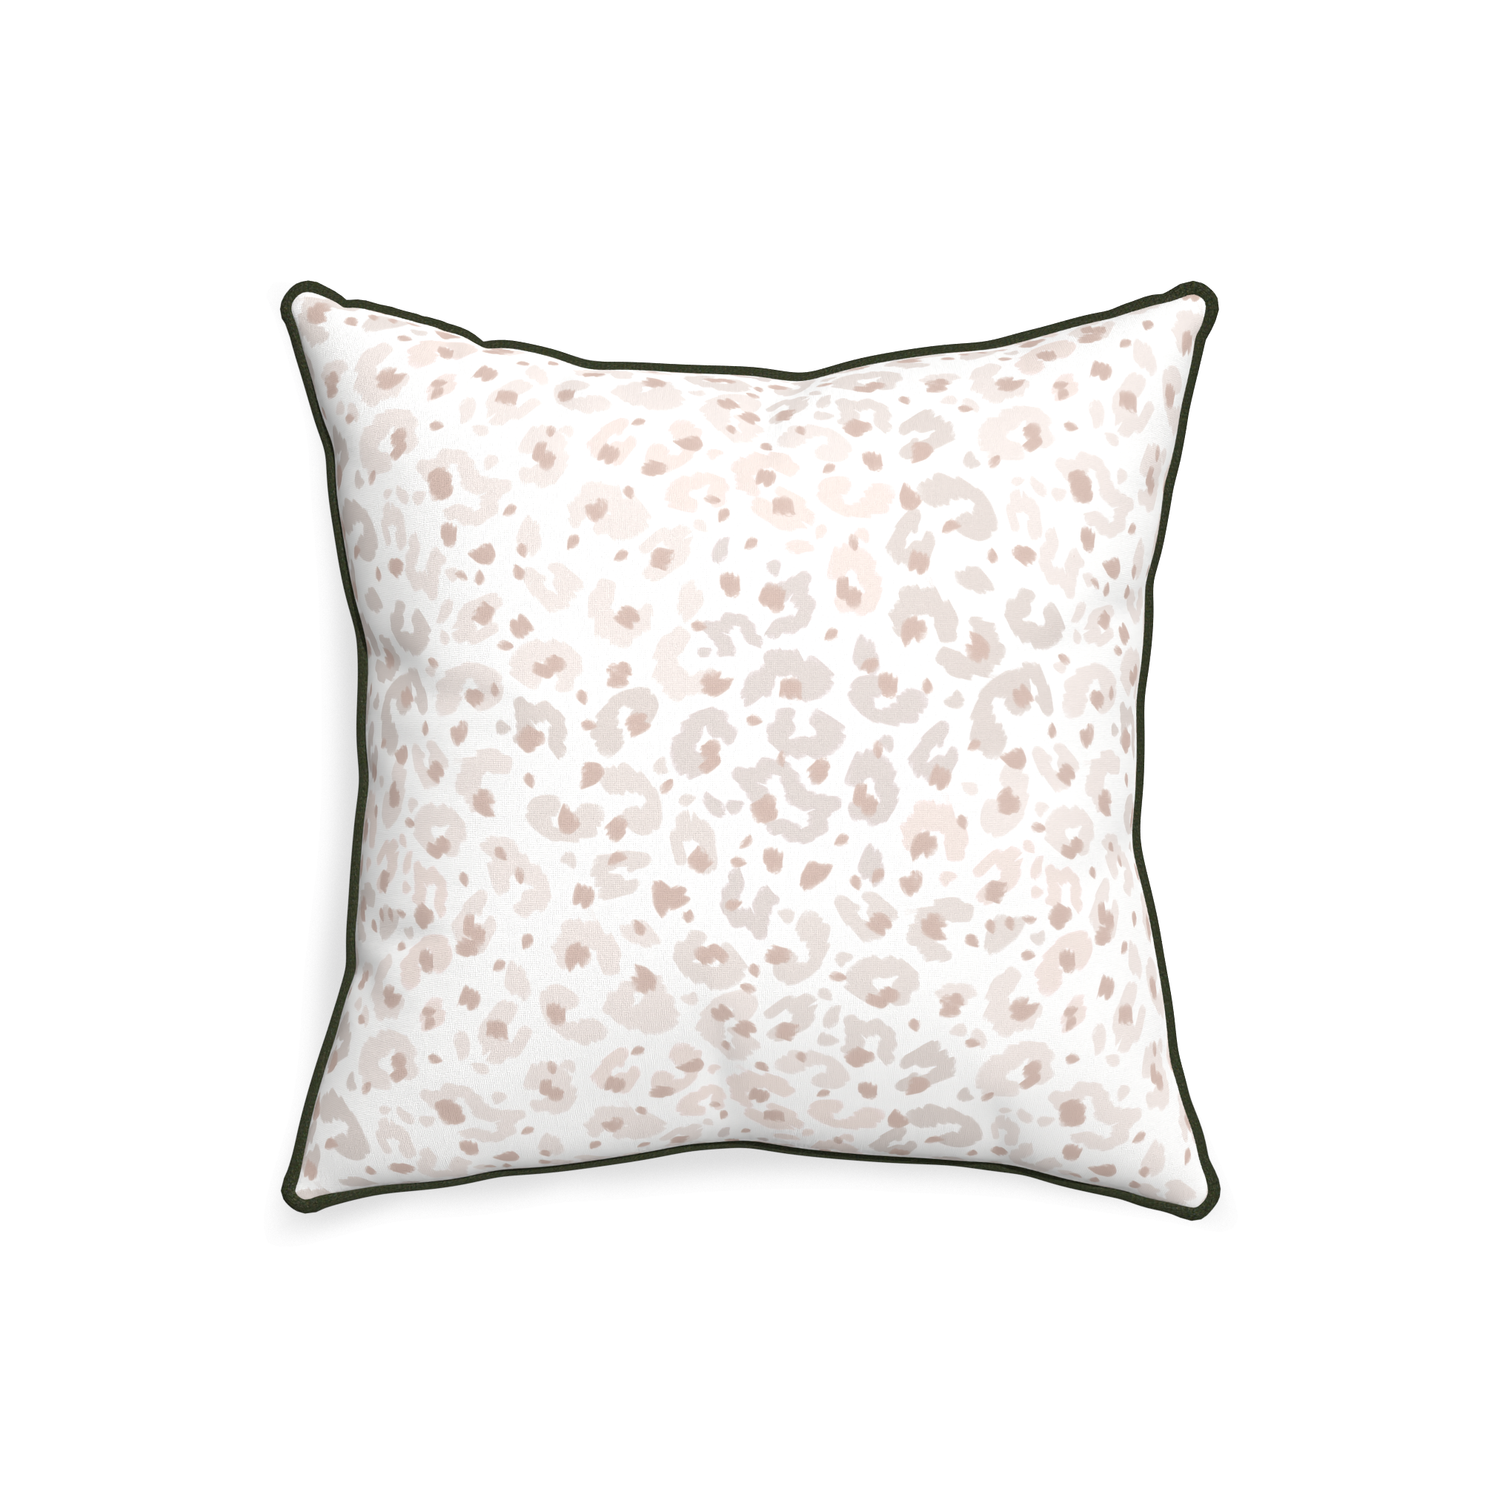 20-square rosie custom beige animal printpillow with f piping on white background